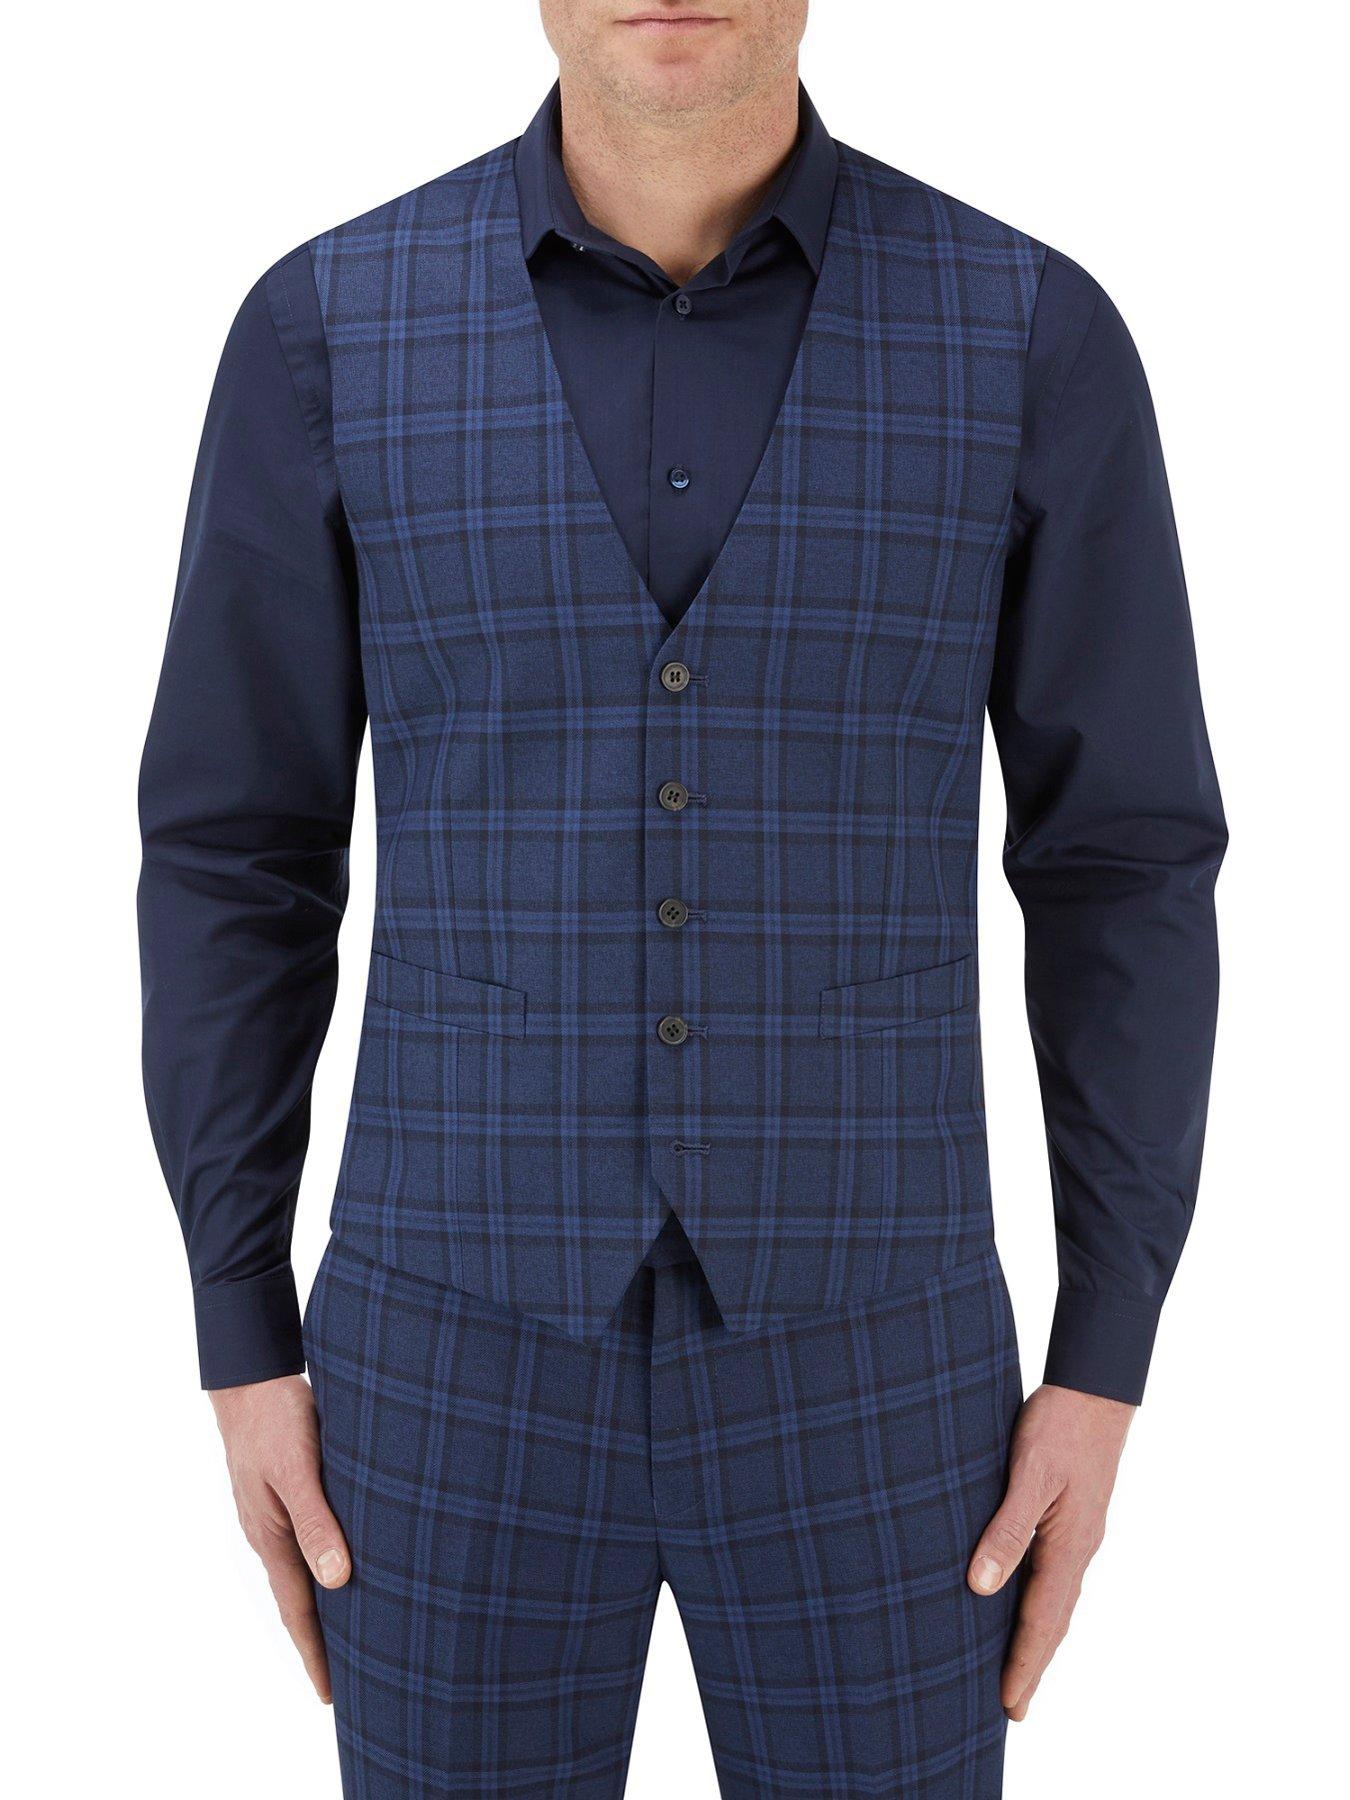 Suits & Blazers Angus 5 Button Bold Check lyfcycle Waistcoat - Navy Check